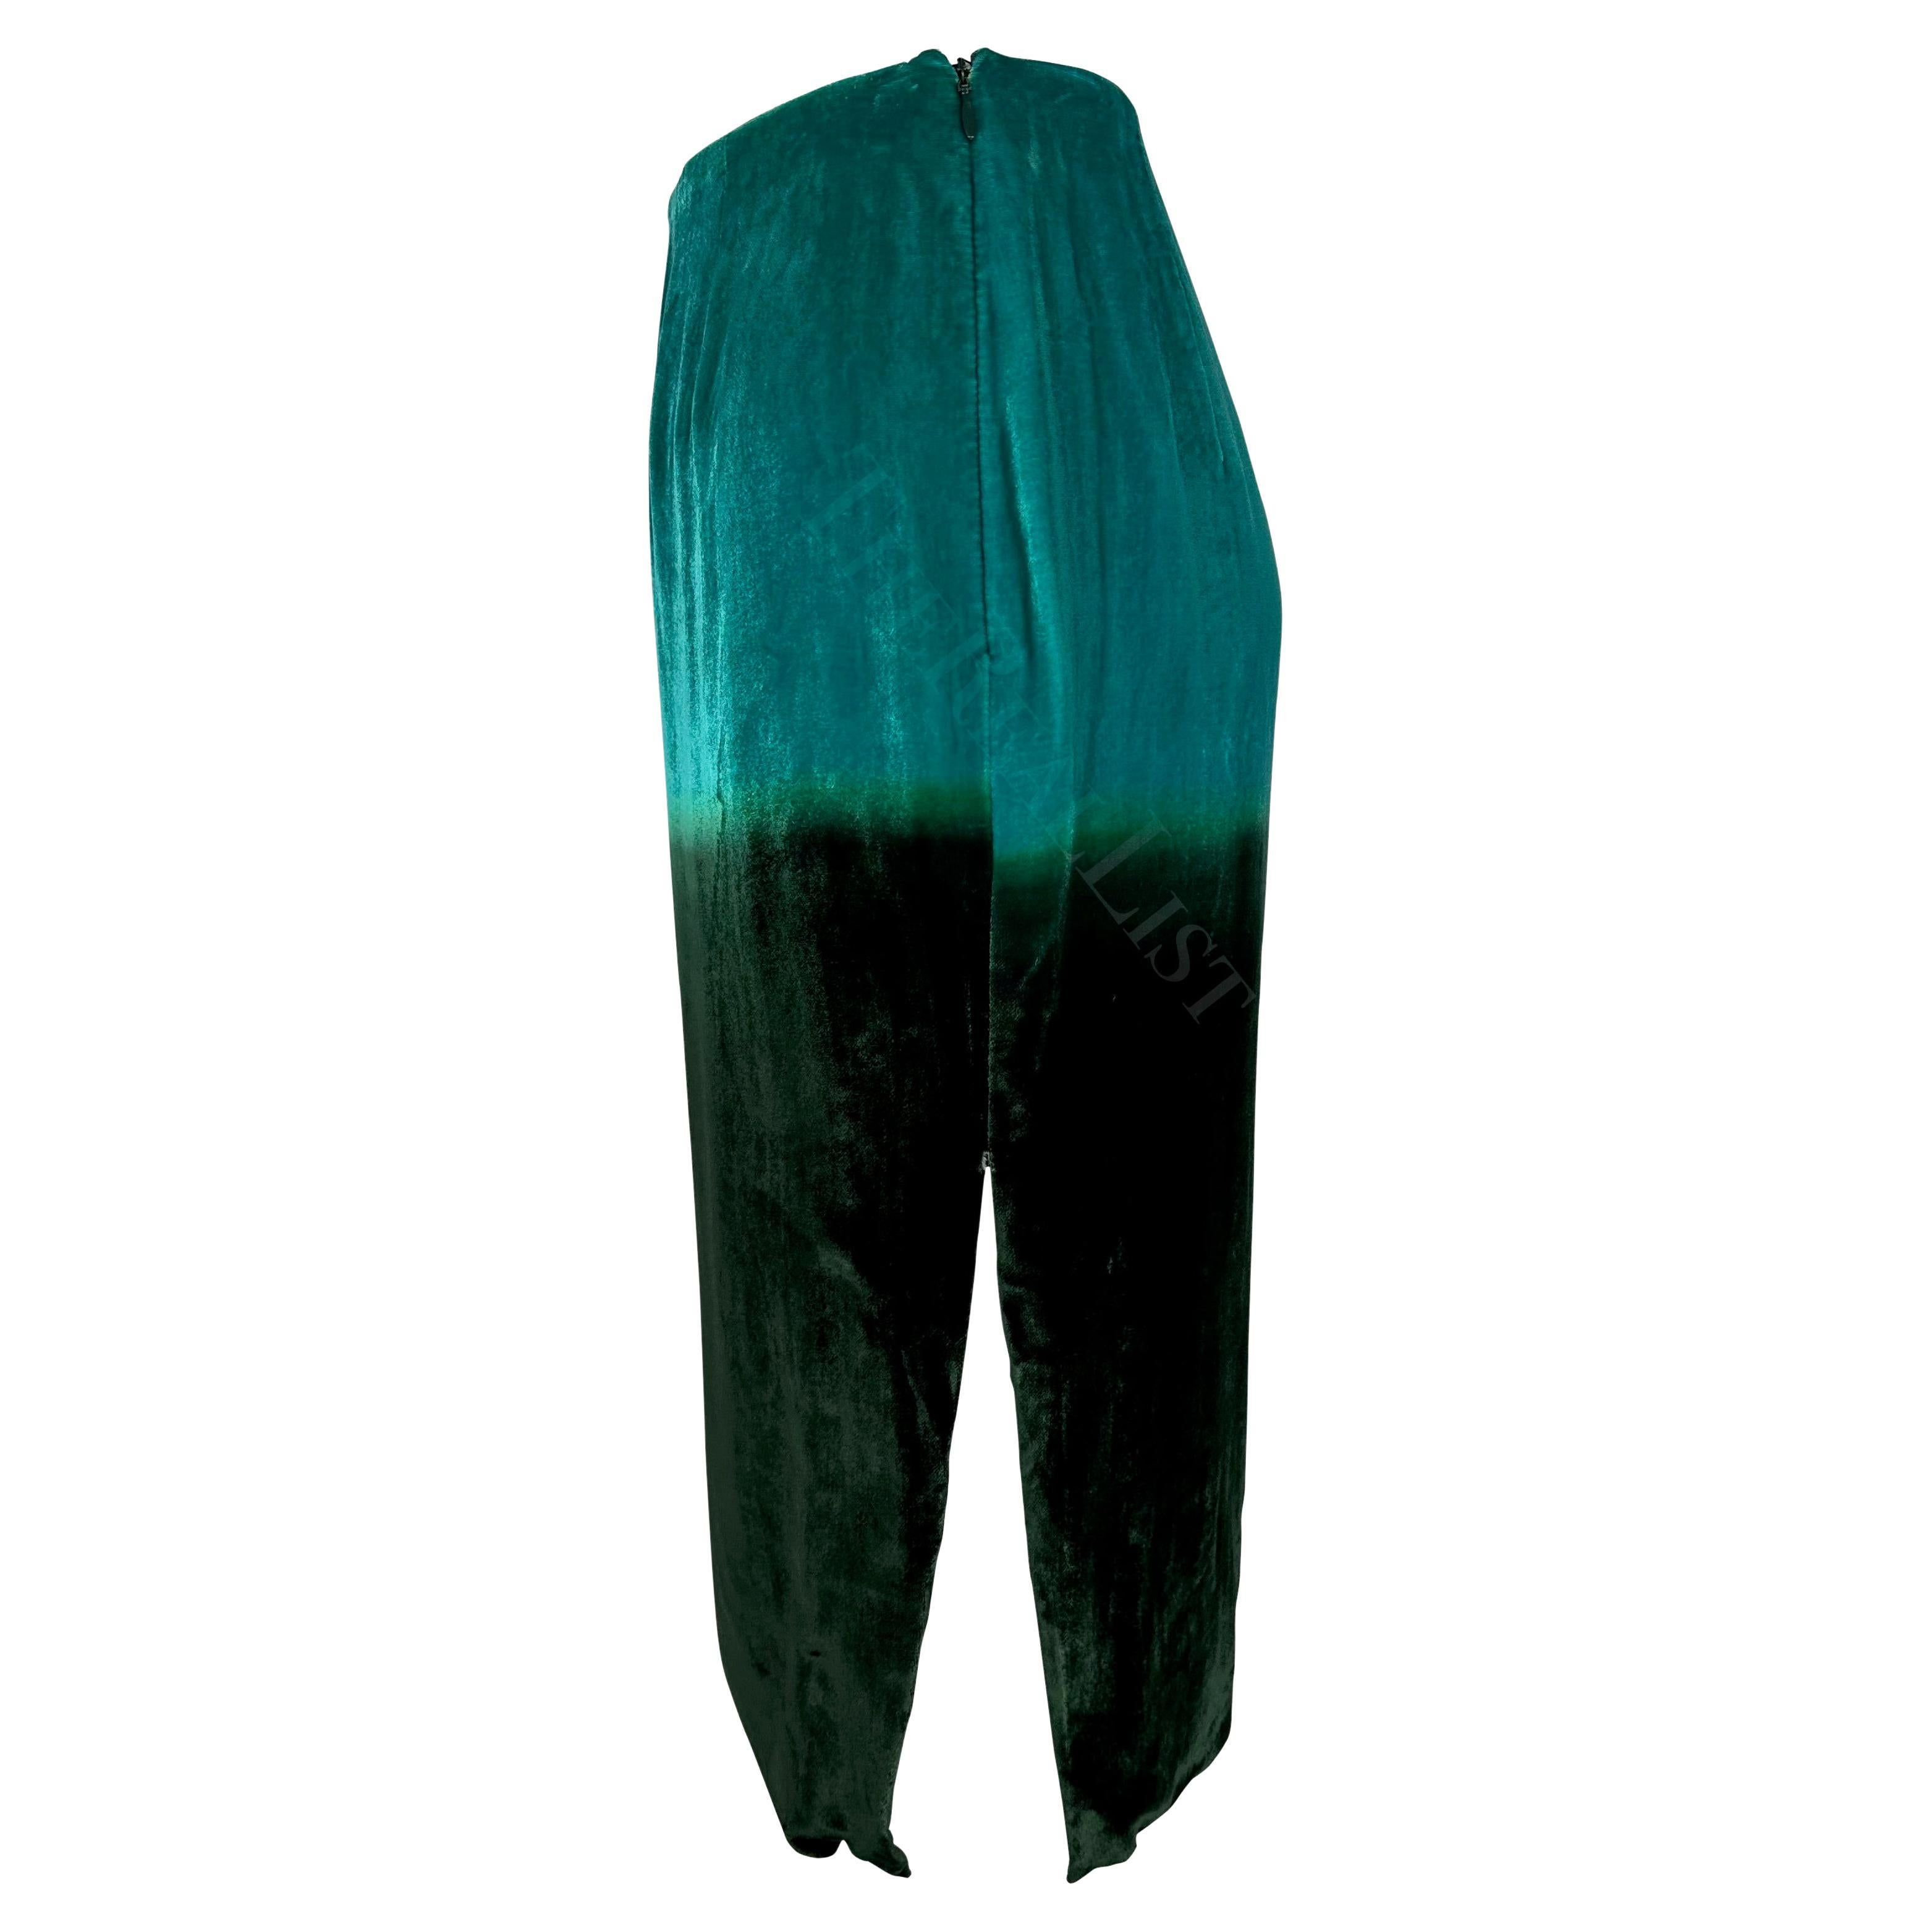 S/S 1997 Gucci by Tom Ford Blue Green Ombré Velvet Runway Skirt In Excellent Condition For Sale In West Hollywood, CA